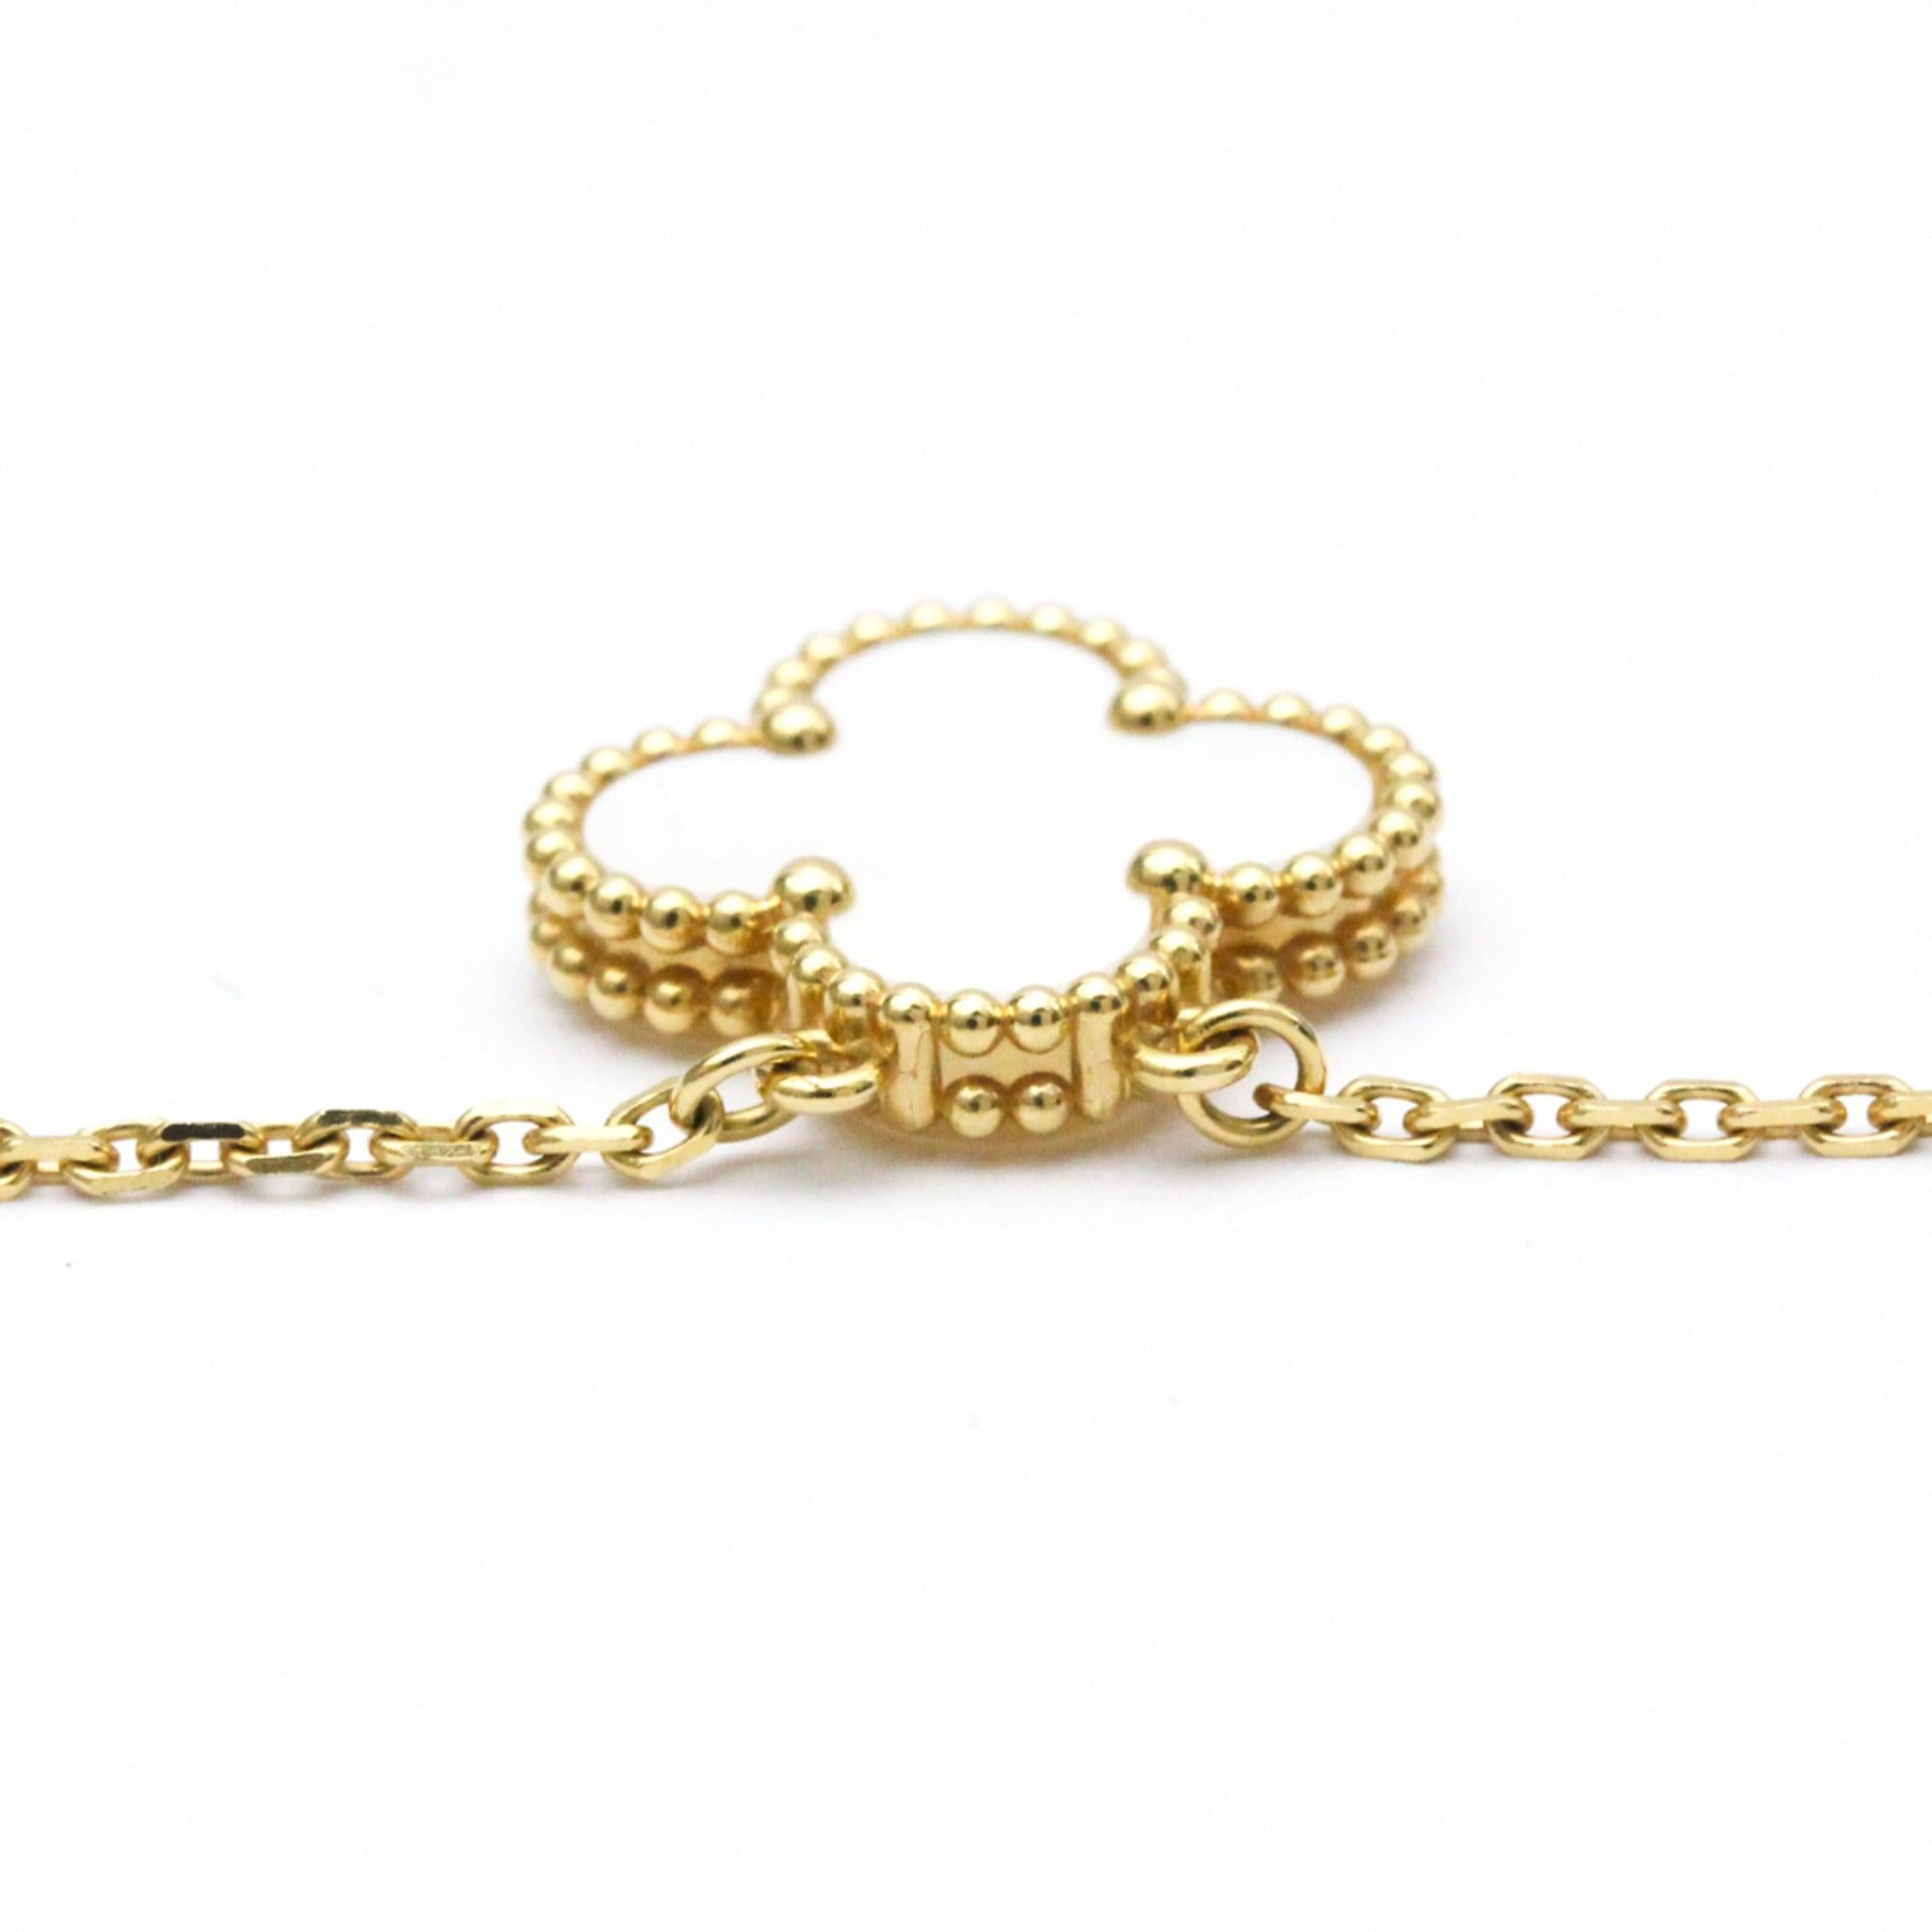 Van Cleef & Arpels Polished Alhambra Mop Necklace in 18K Yellow Gold 1